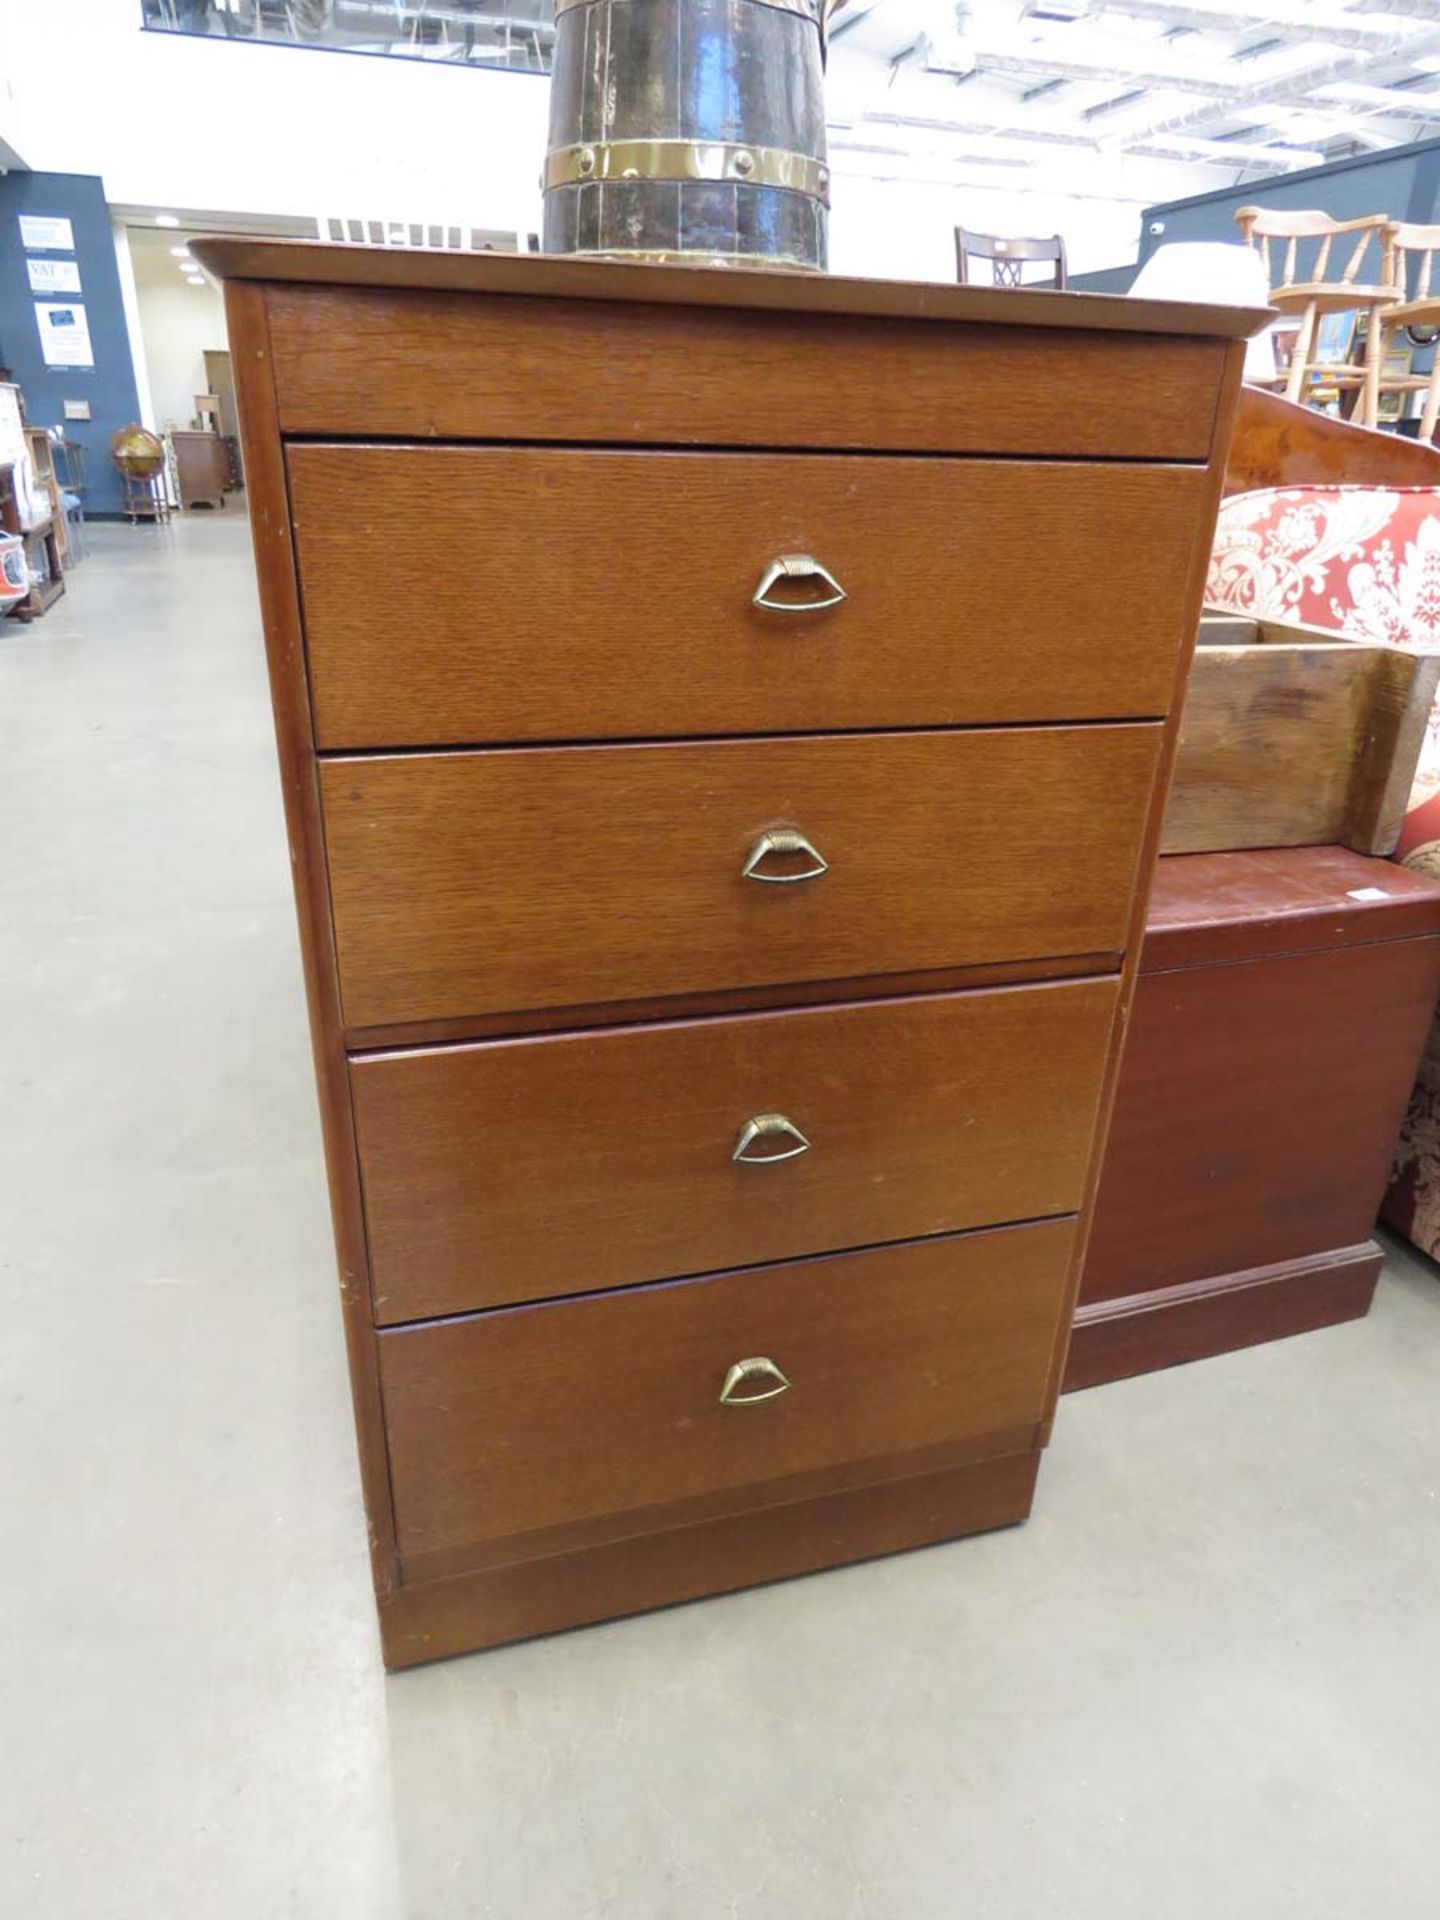 A Lebus narrow chest of 4 drawers